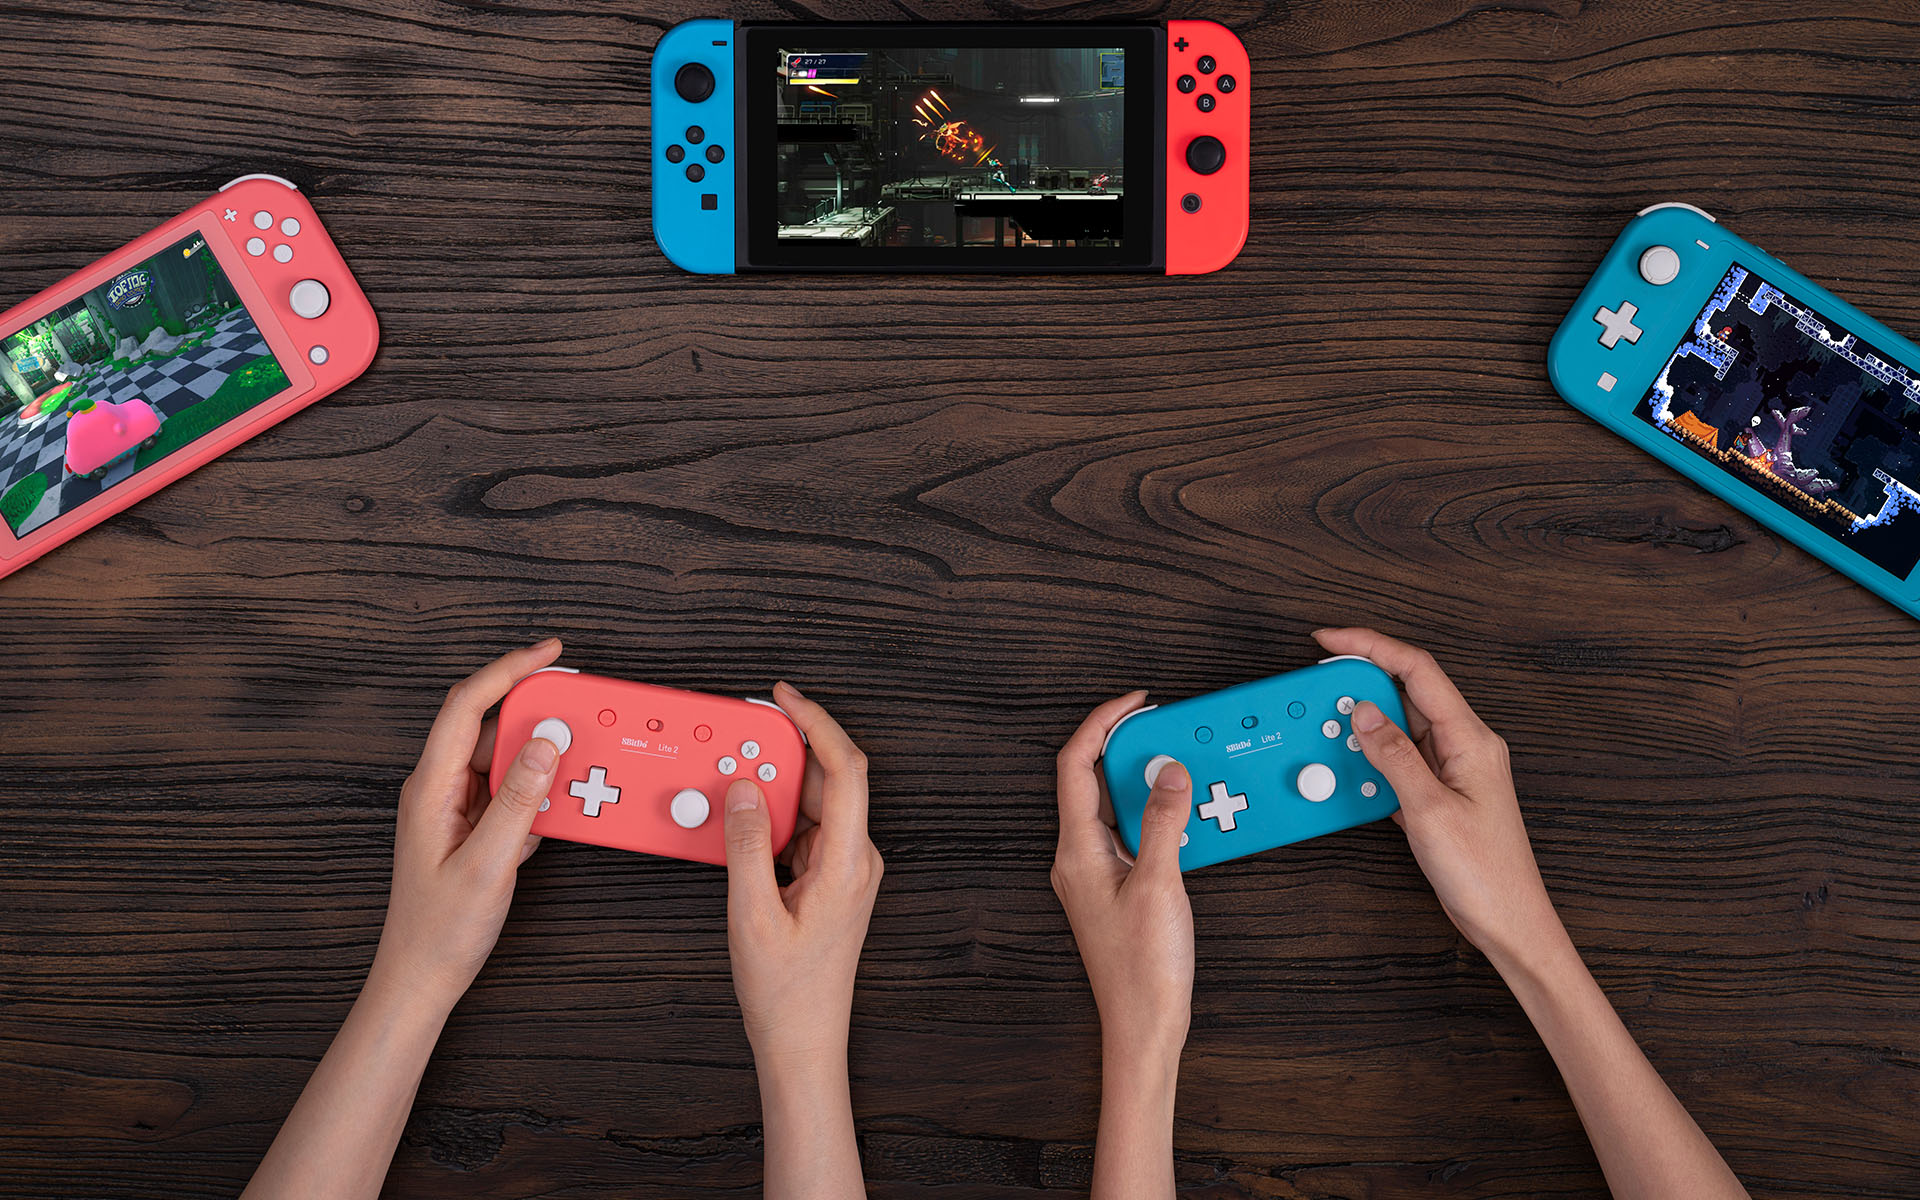 8Bitdo Lite SE Bluetooth Gamepad for Switch, Android, iPhone, iPad, macOS  and Apple TV, for Gamers with Limited Mobility